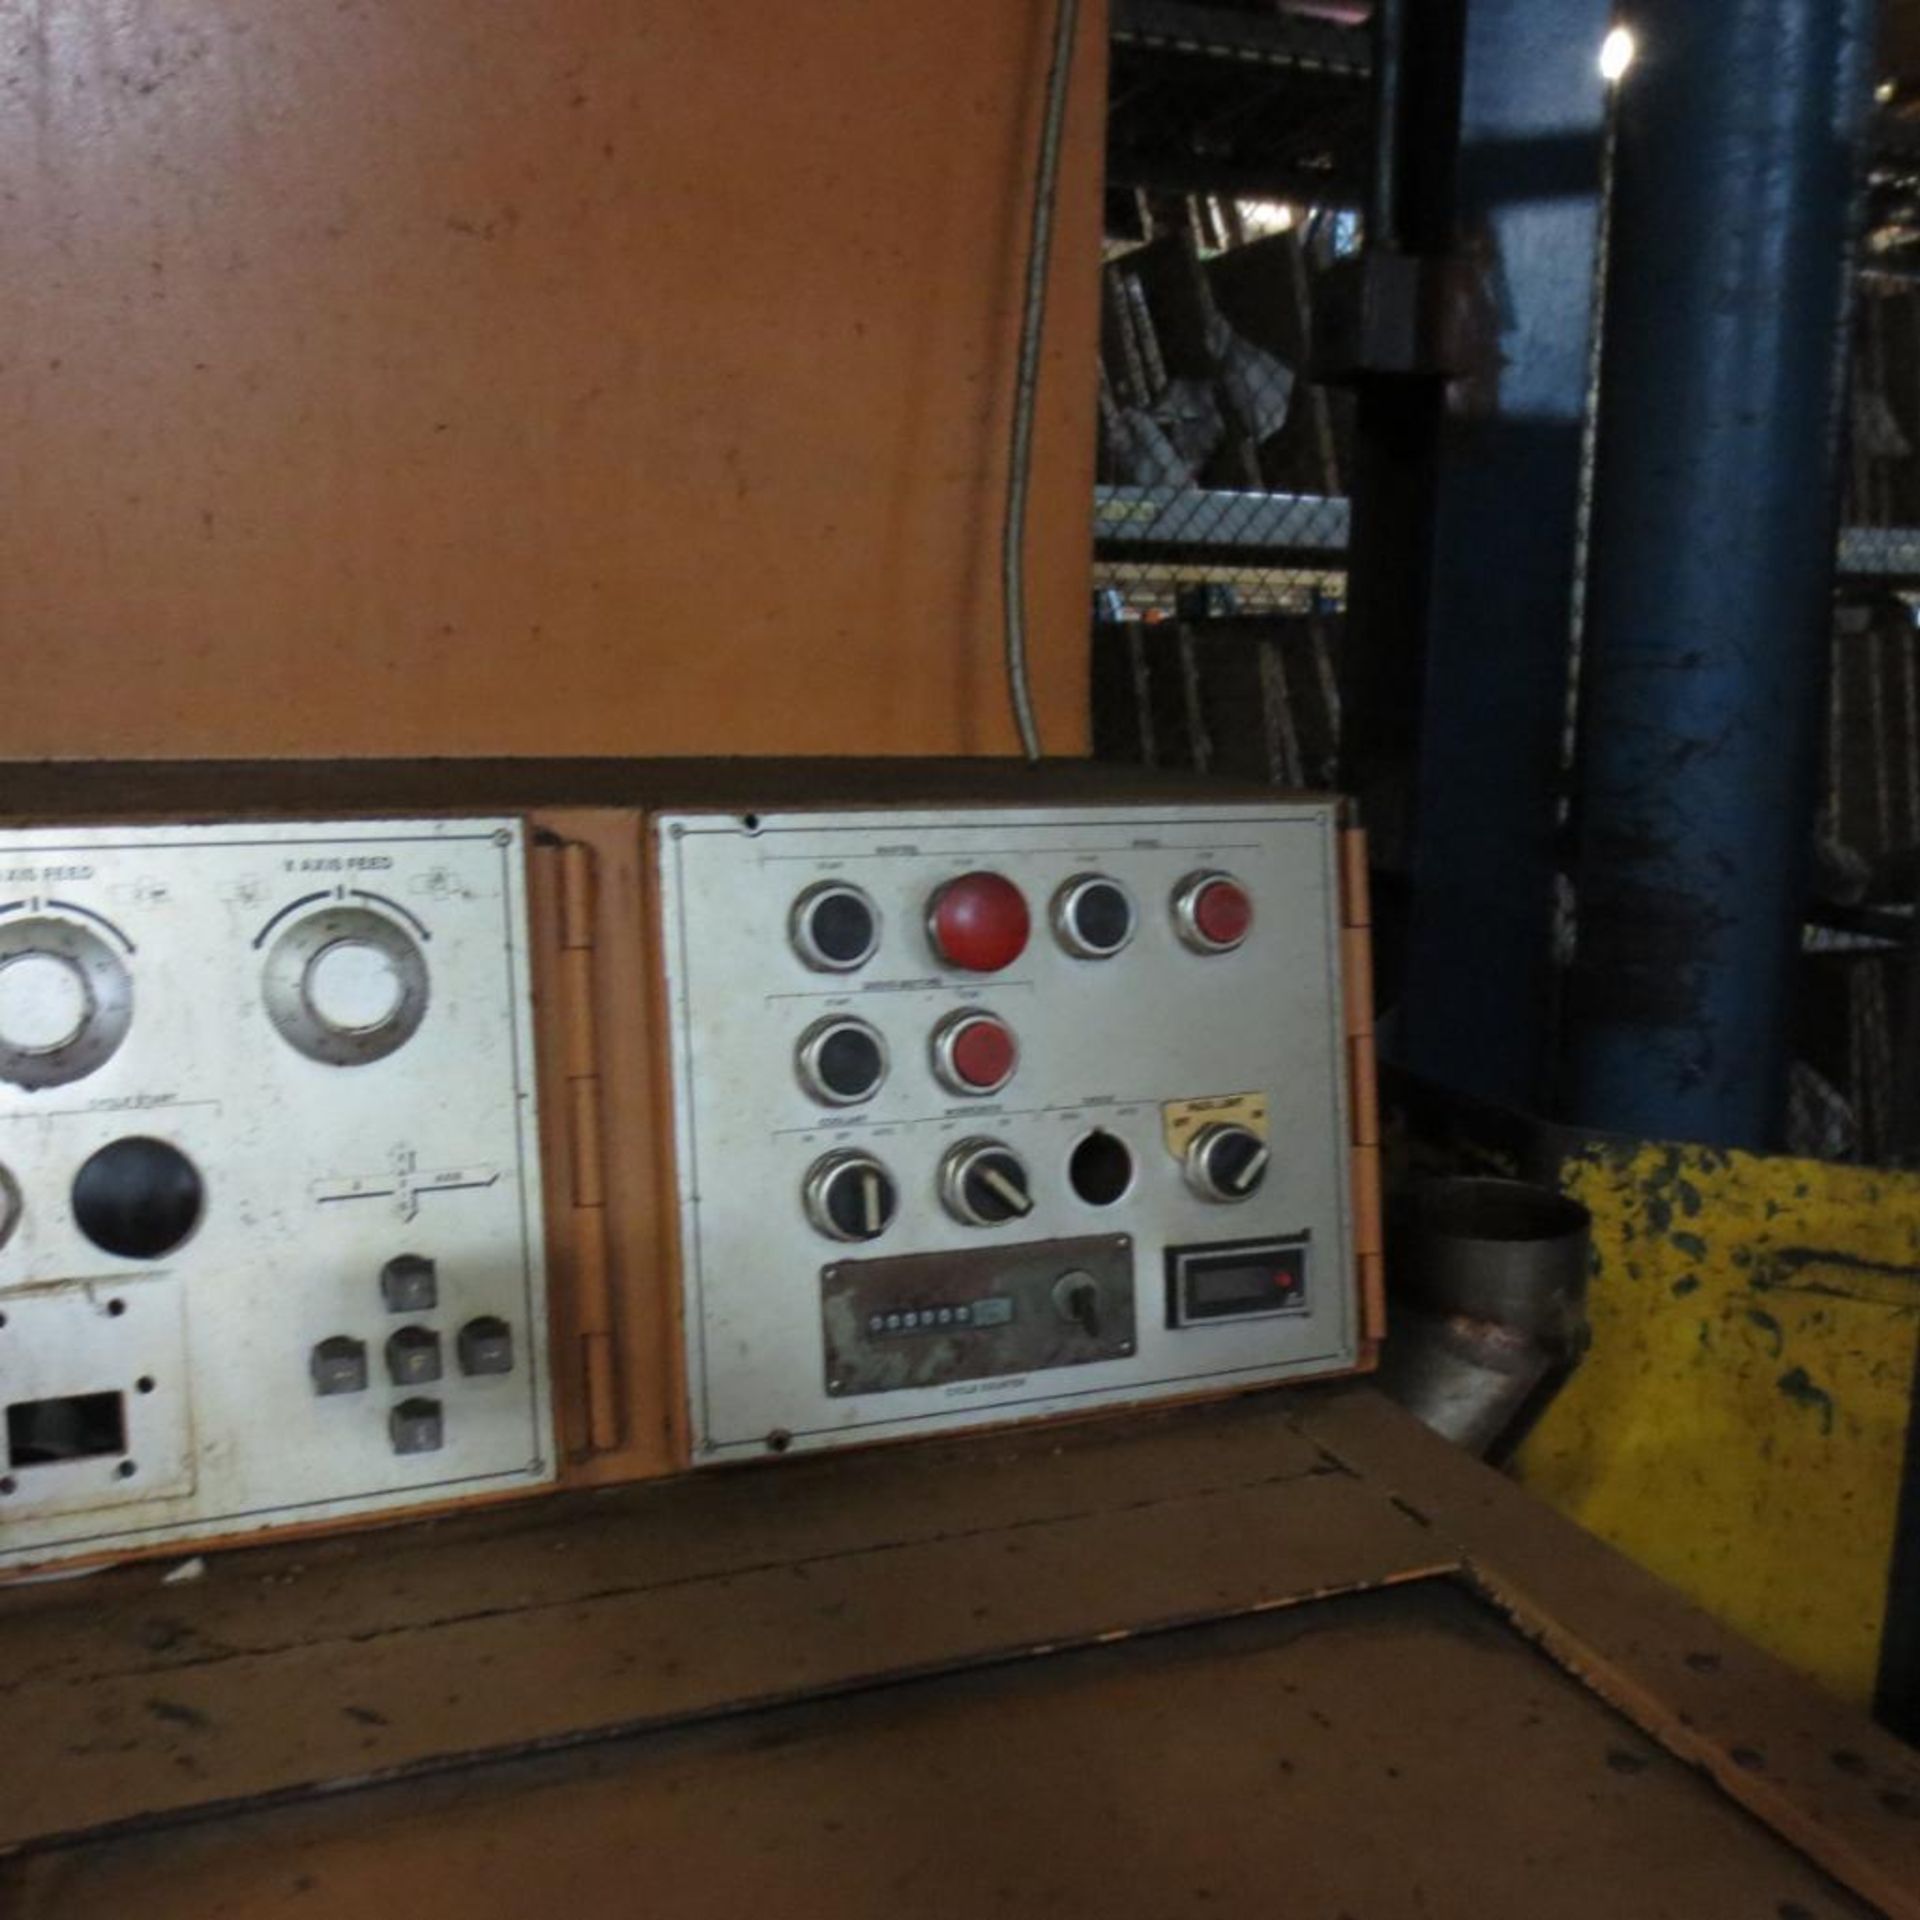 Bryant EX-Cell-0 LL1 CNC Grinder, S/N W-16891. Loading Fee is $350.00 - Image 3 of 12